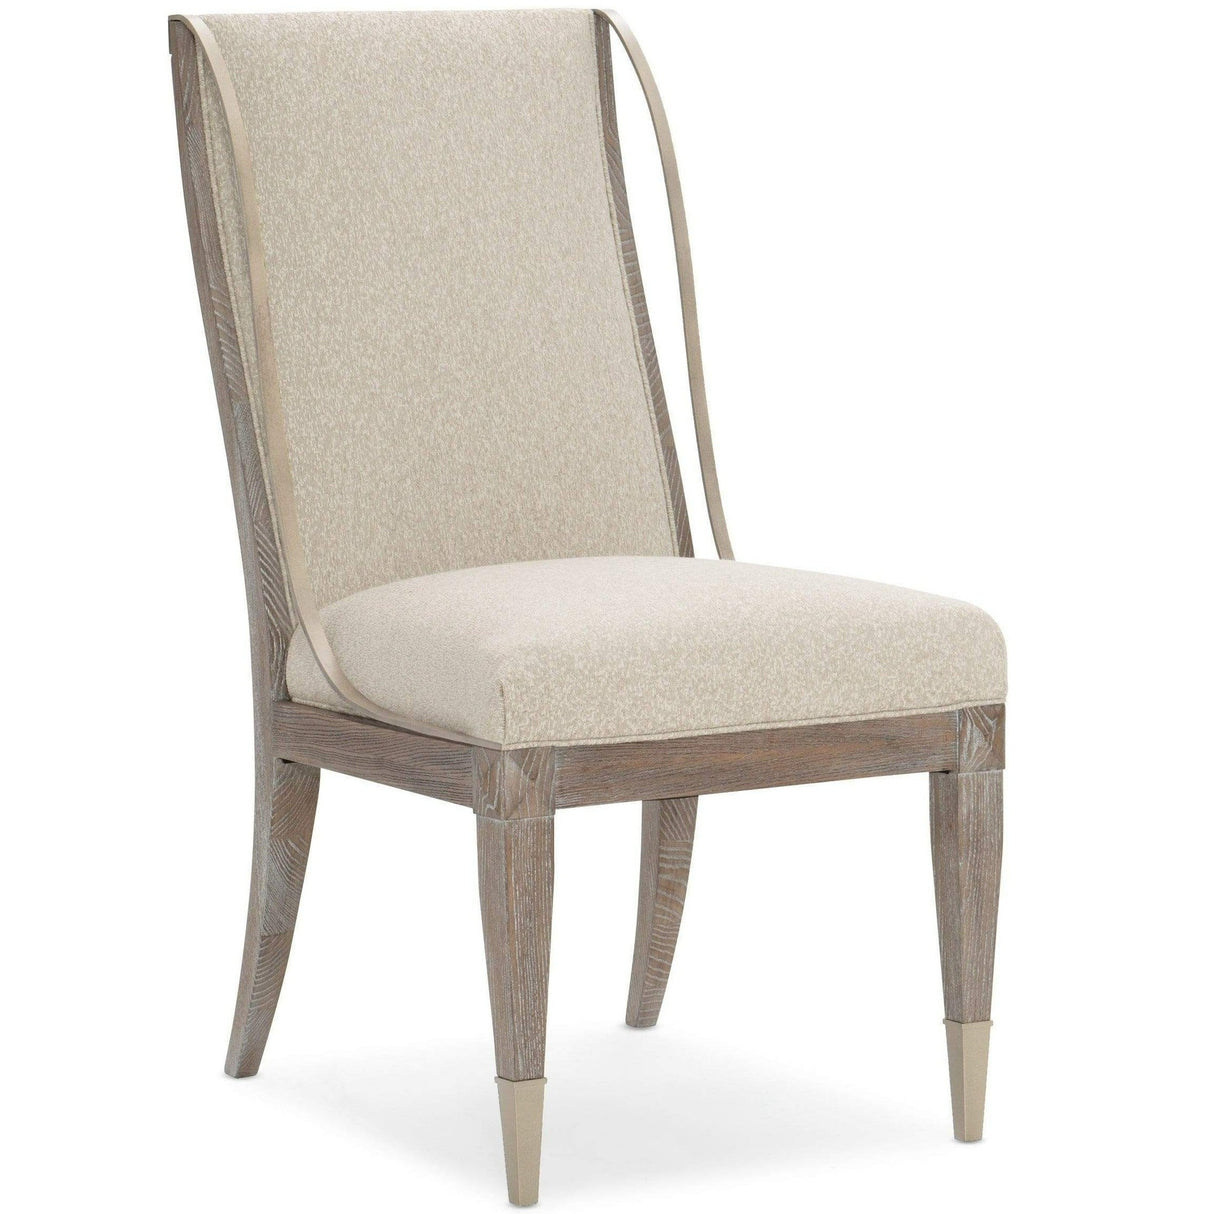 Caracole Open Arms Side Chair Furniture caracole-CLA-019-283